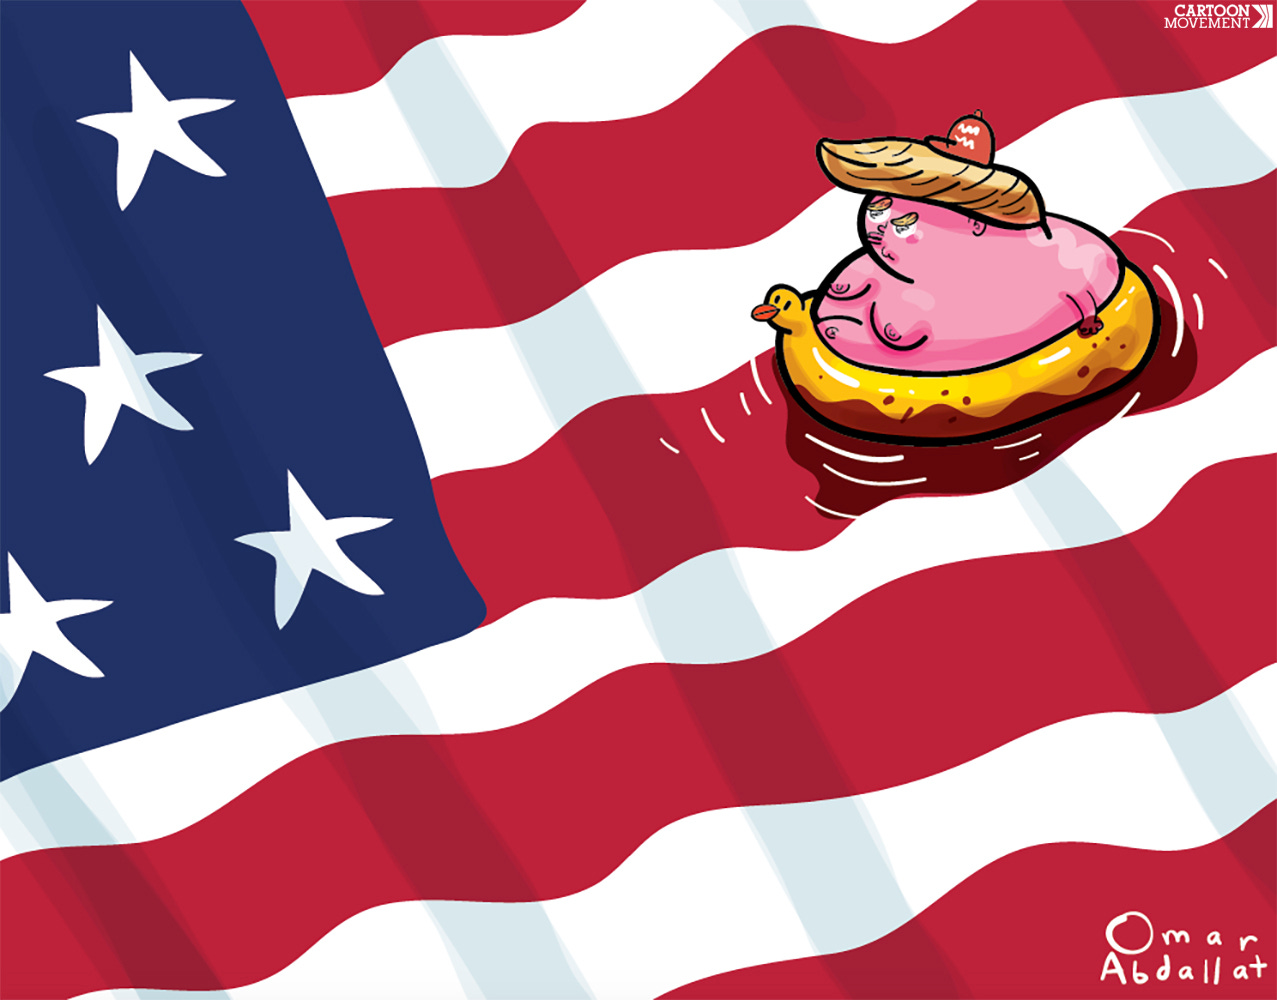 Cartoon showing the US flag. The red stripes in the flag are blood and Trump is floating in an inflatable tyre in the shape of a yellow rubber duck.